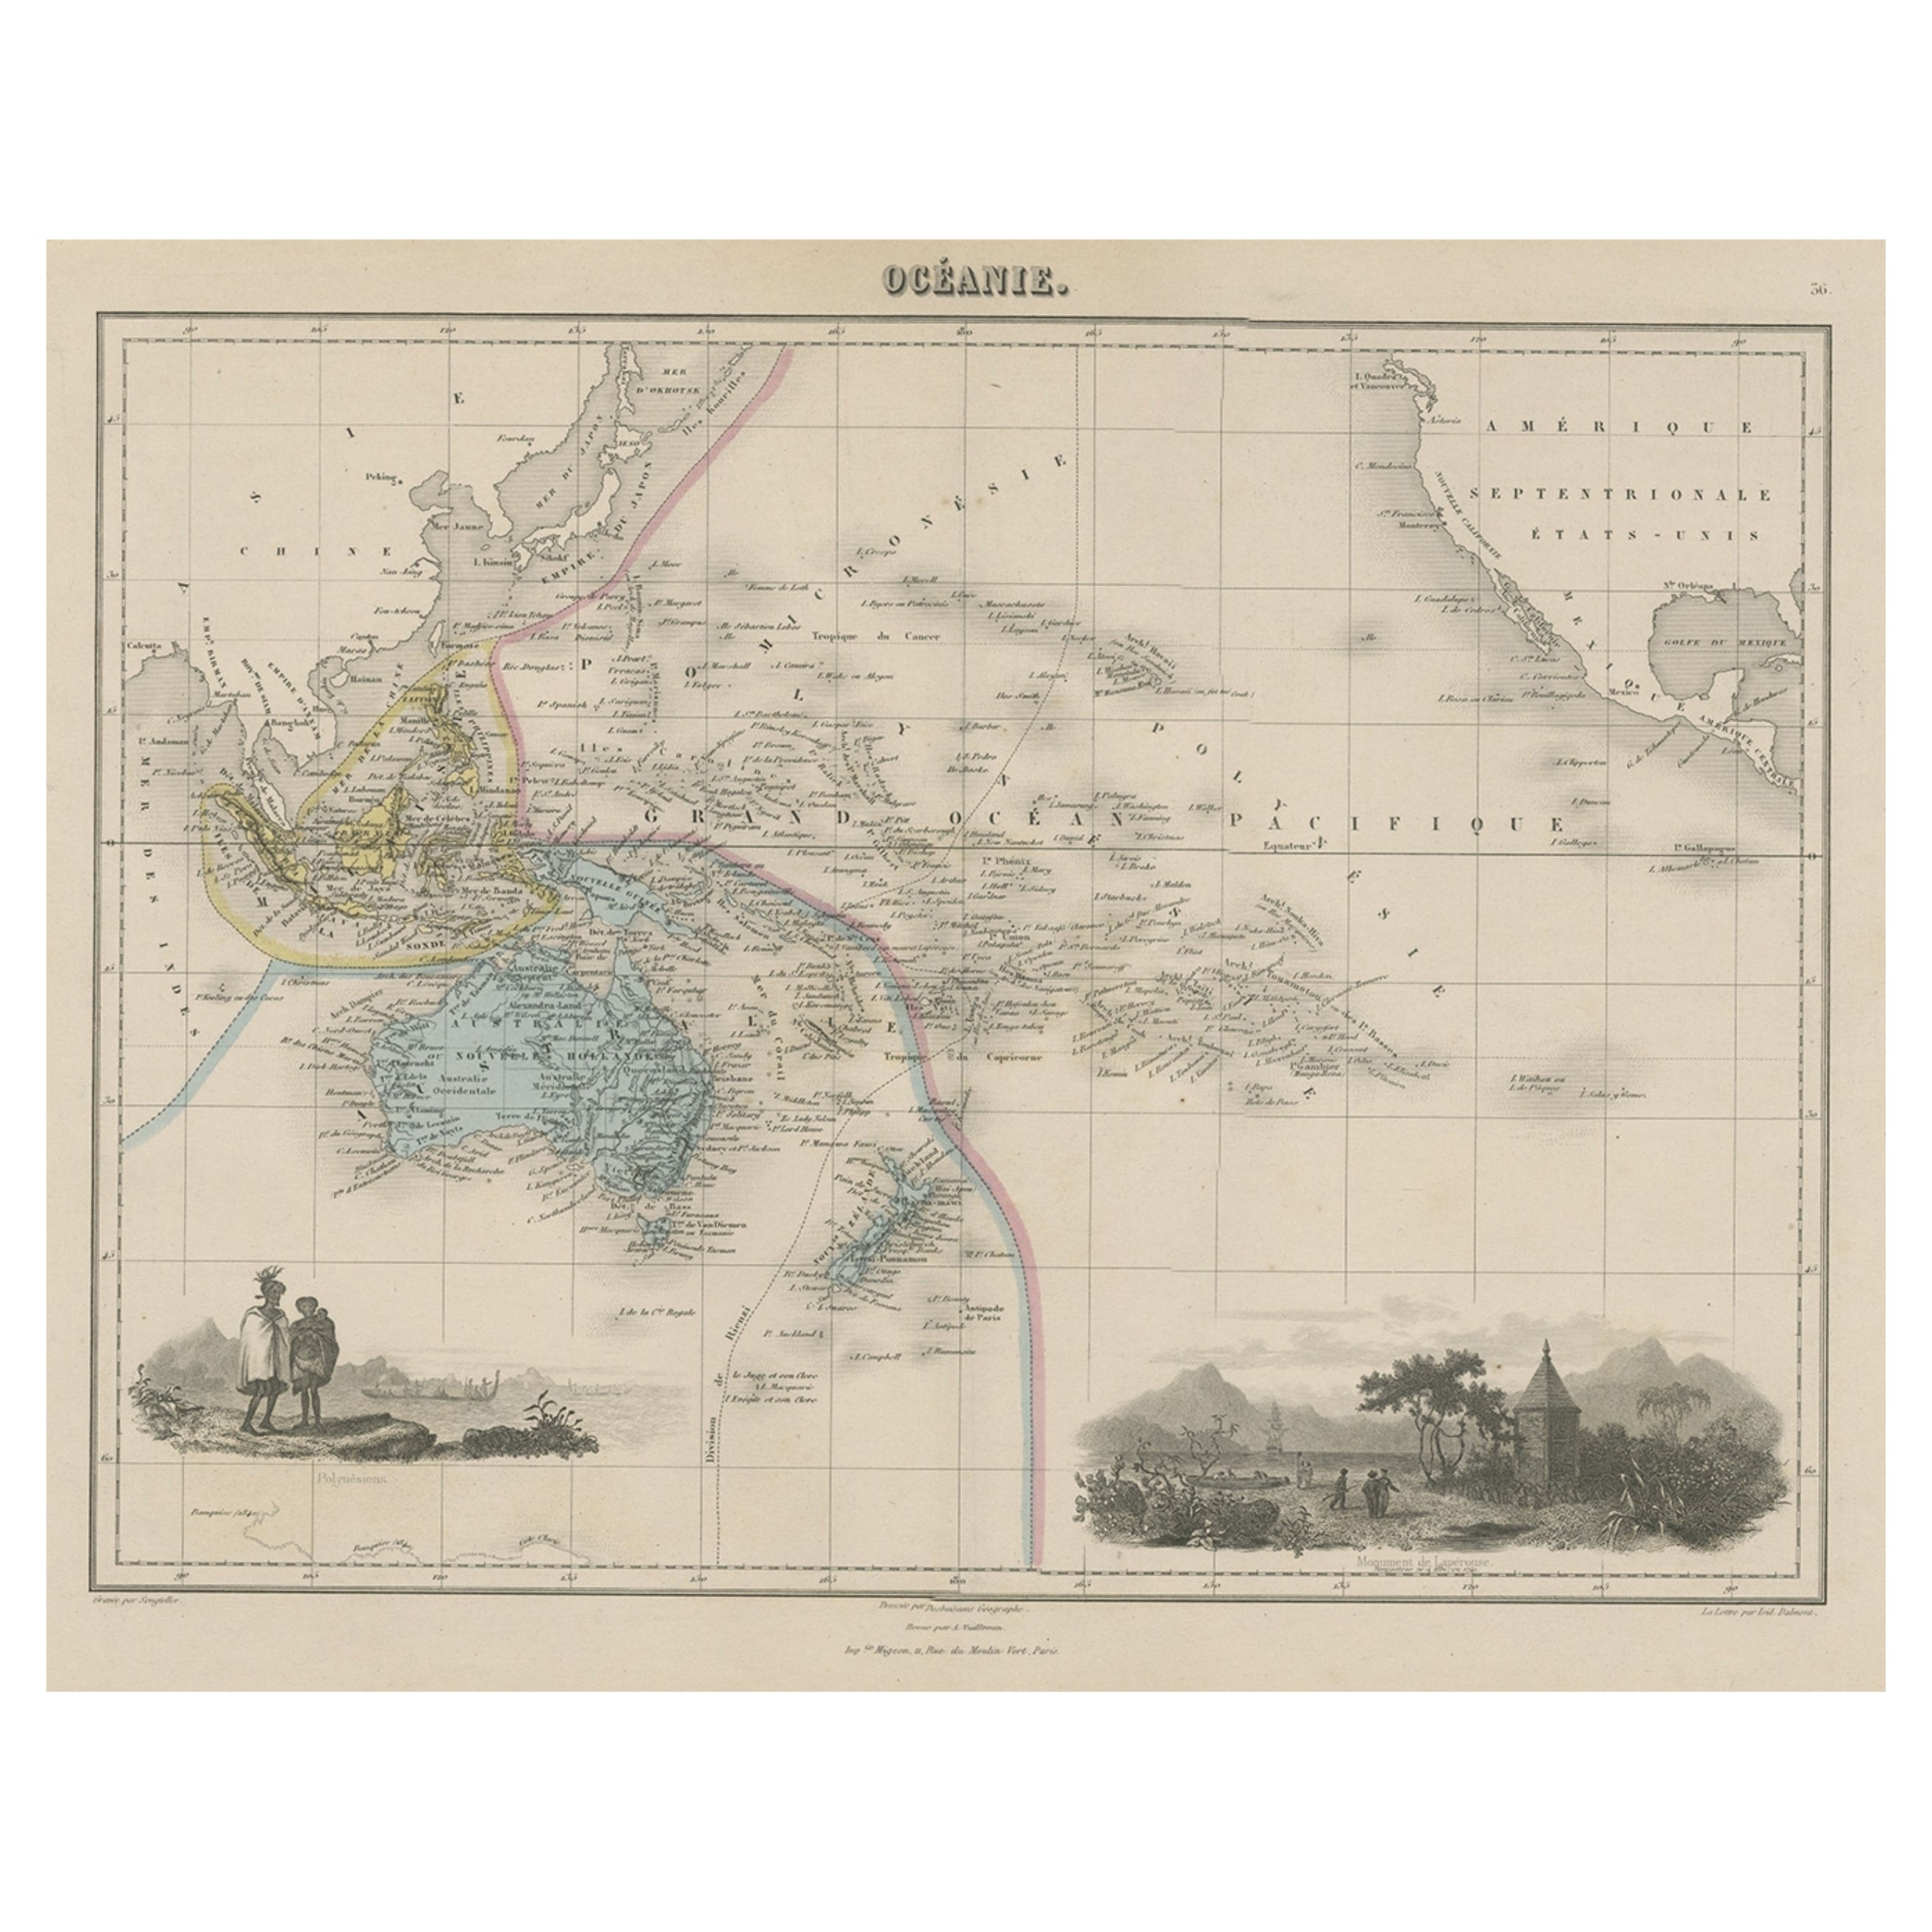 Old Map of the Oceans Around Australia, Indonesia and New Zealand, 1880 For Sale